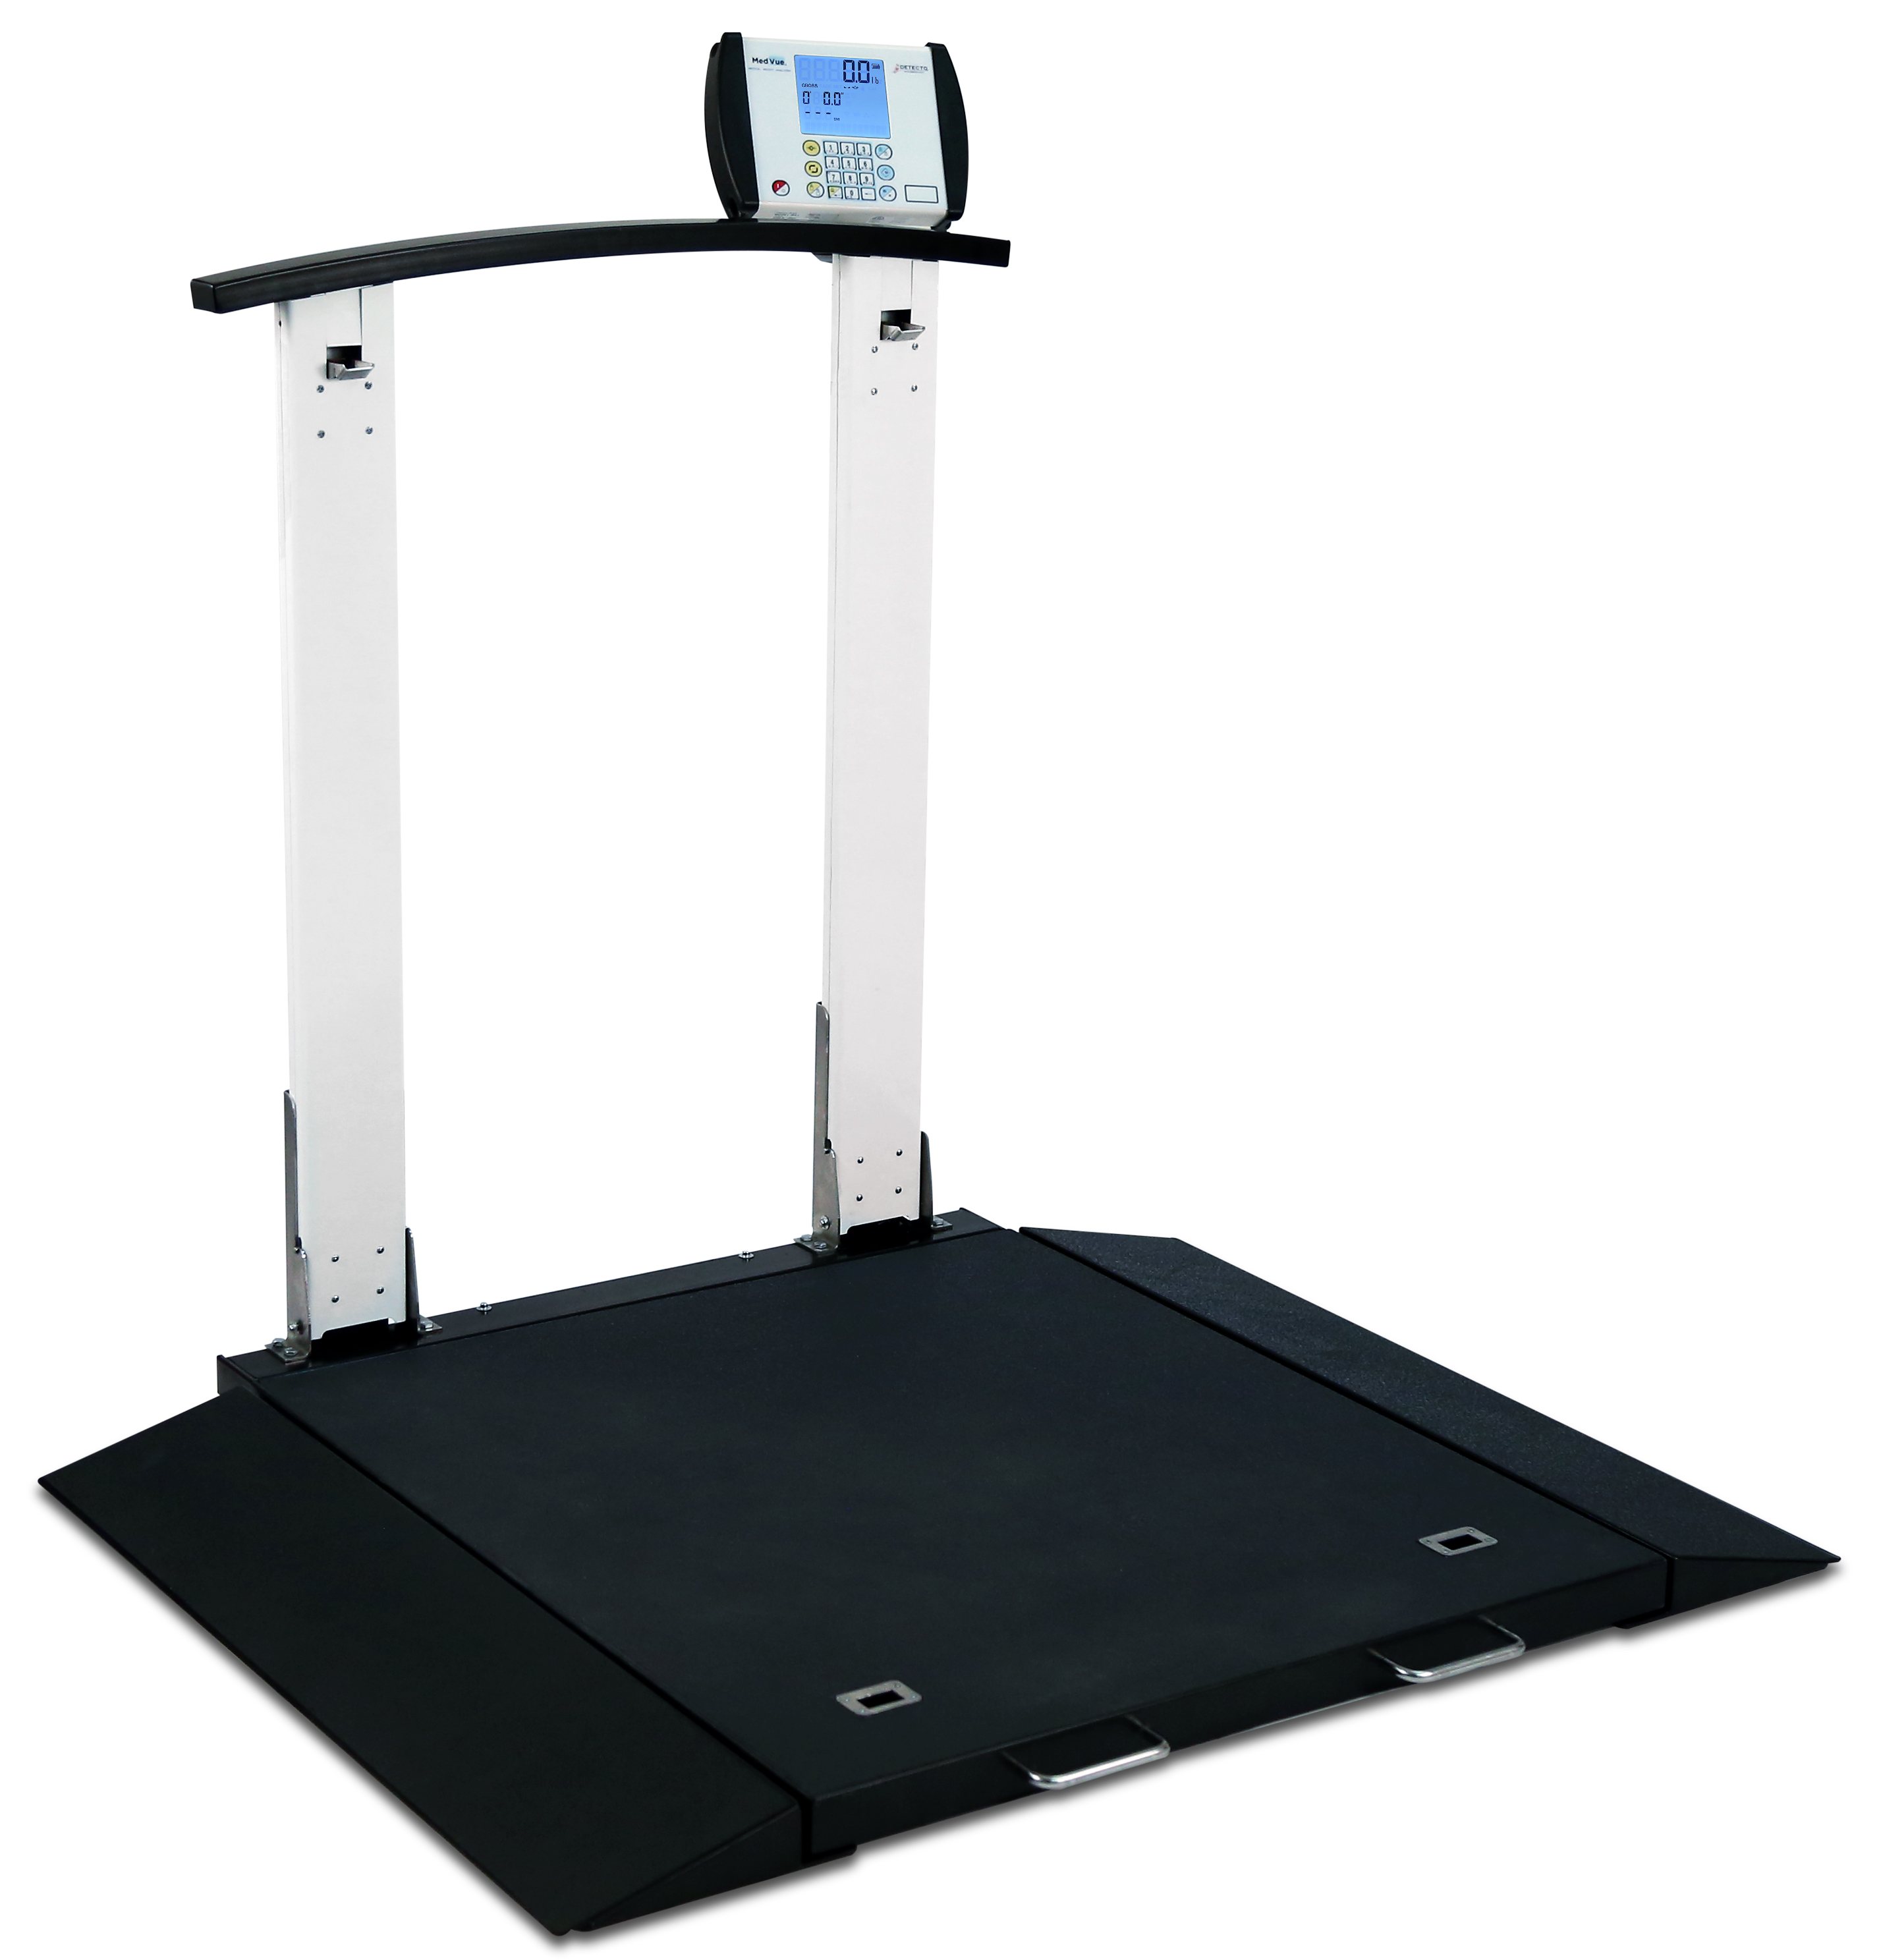 Detecto 6856 Bariatric Medical Scale with Handrail 1,000 lb x 0.2 lb, BMI,  RS232